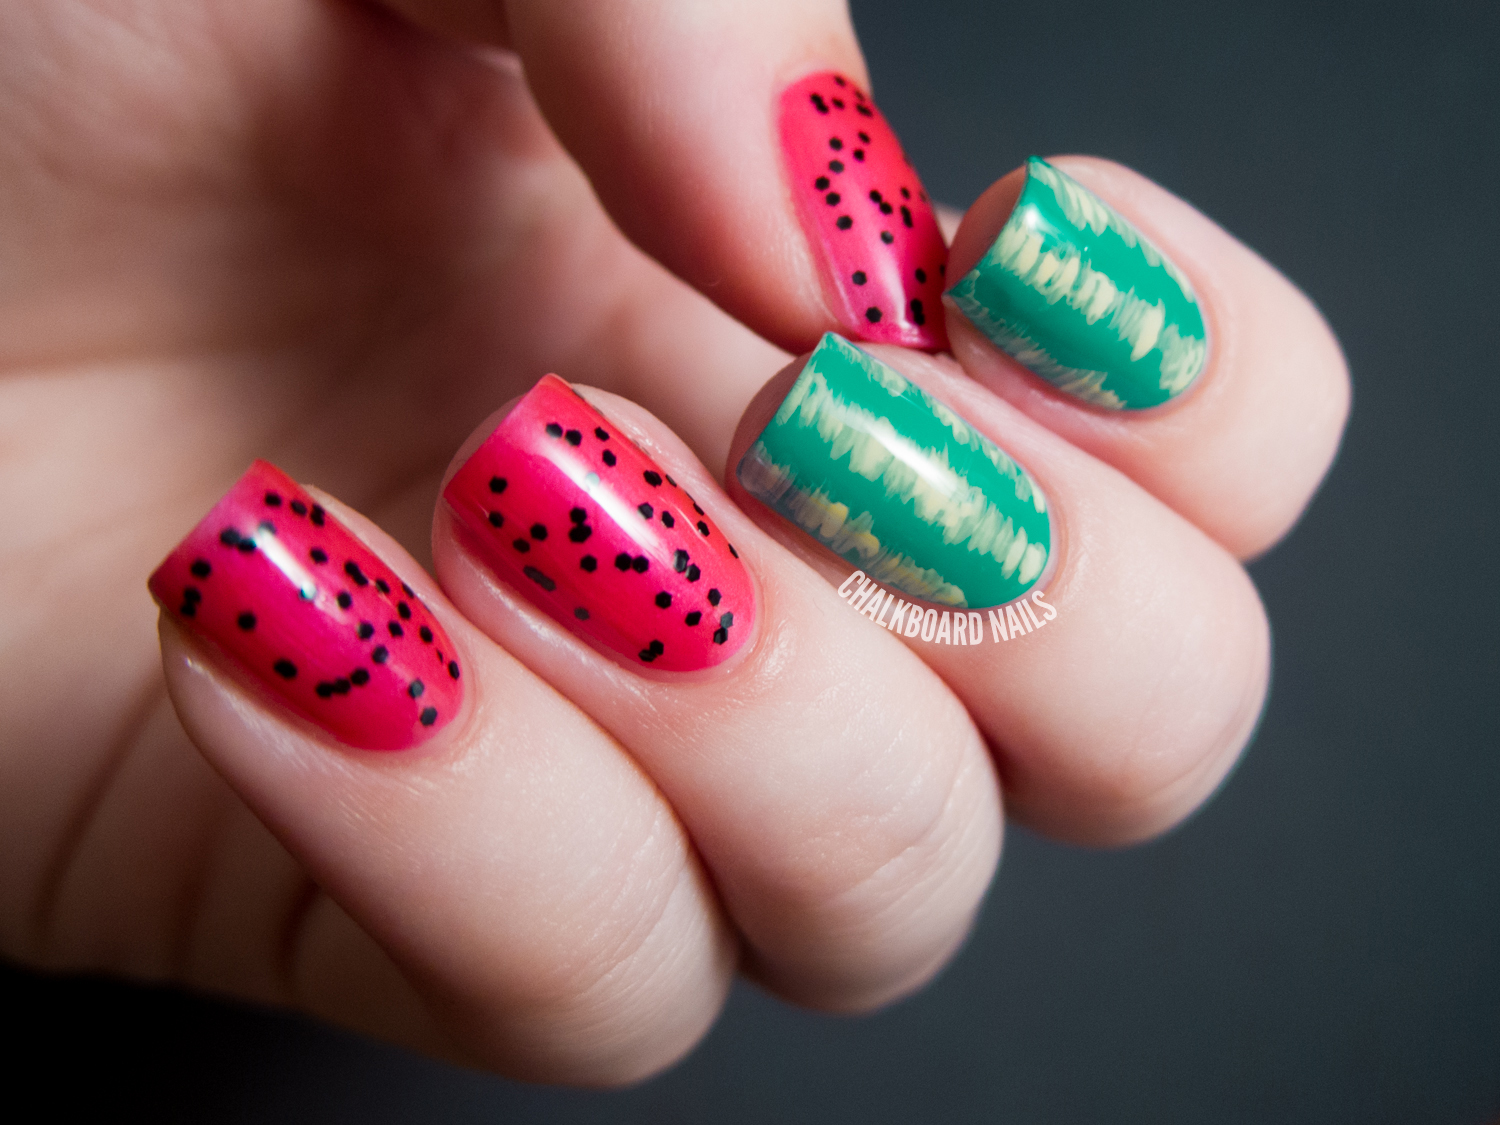 Watermelon Nail Art Toes: 5 Easy DIY Designs for Beginners - wide 3